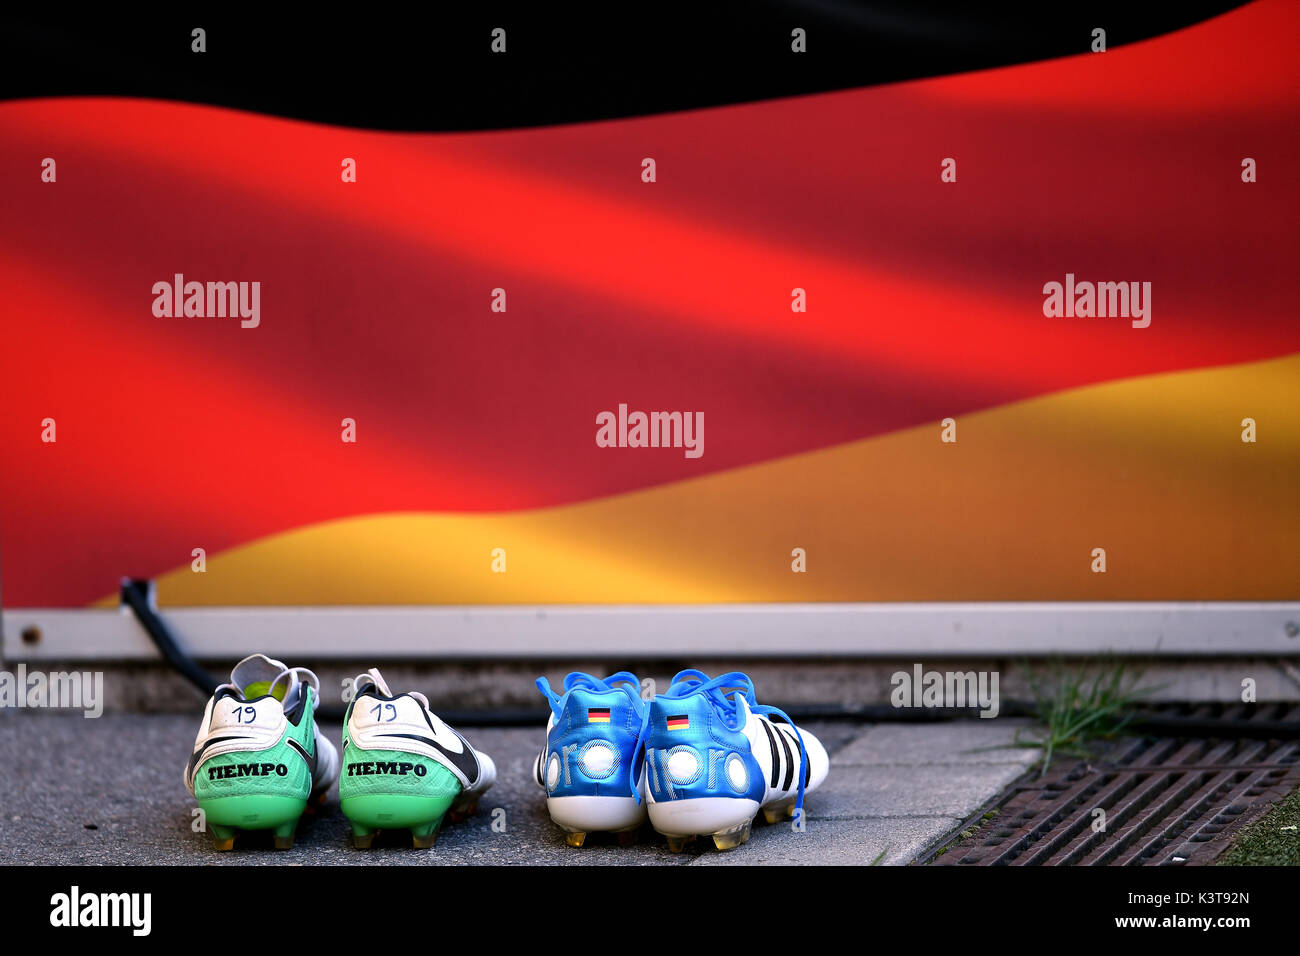 Fussballschuhe High Resolution Stock Photography and Images - Alamy